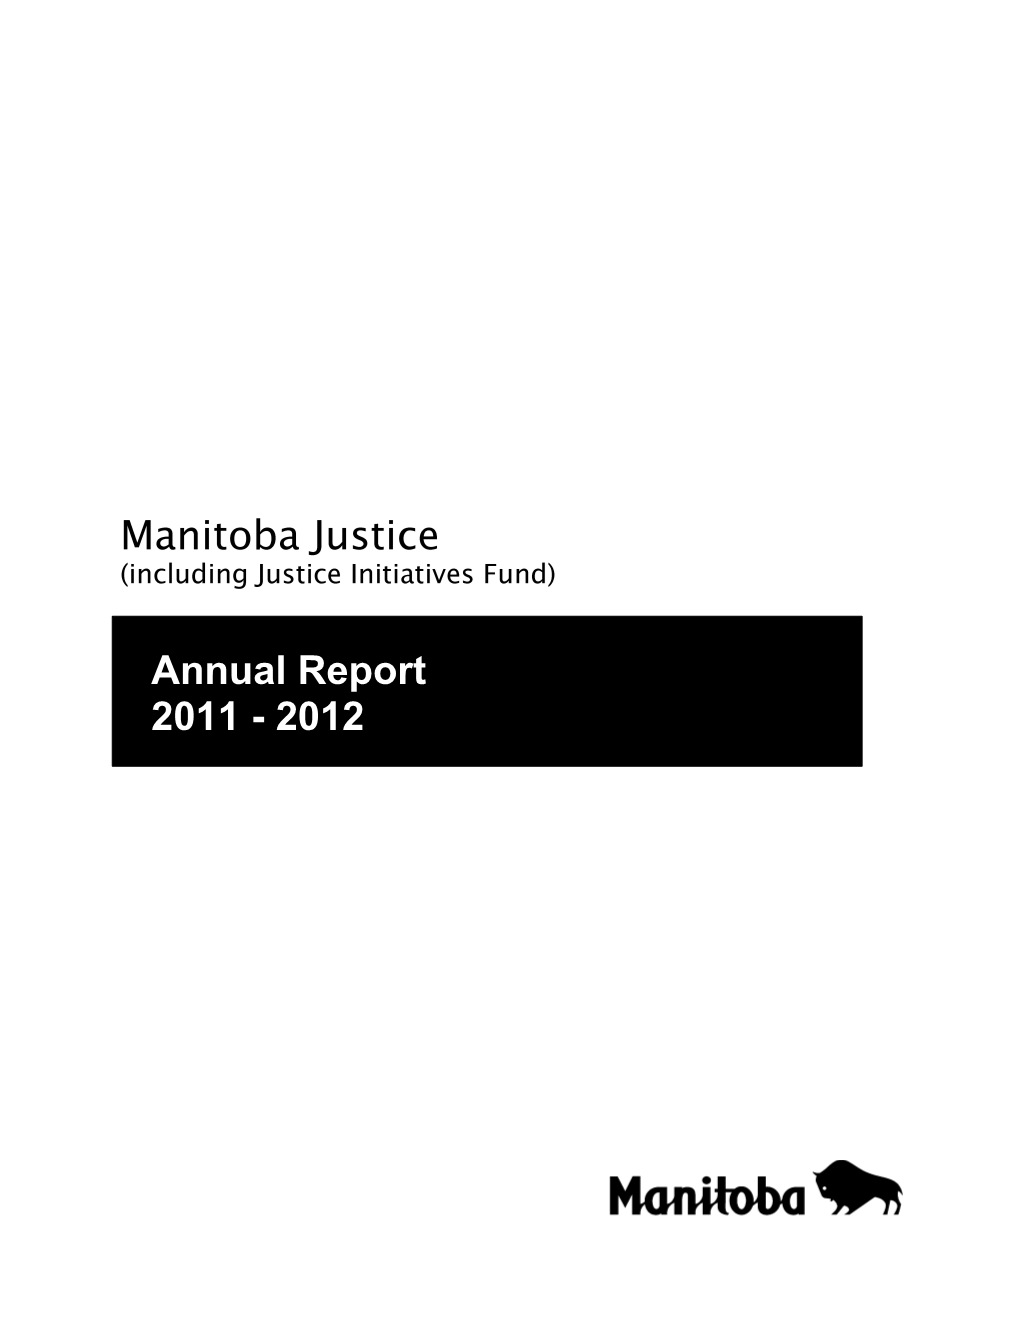 Manitoba Justice Is Responsible for the Administration of Civil and Criminal Justice in Manitoba